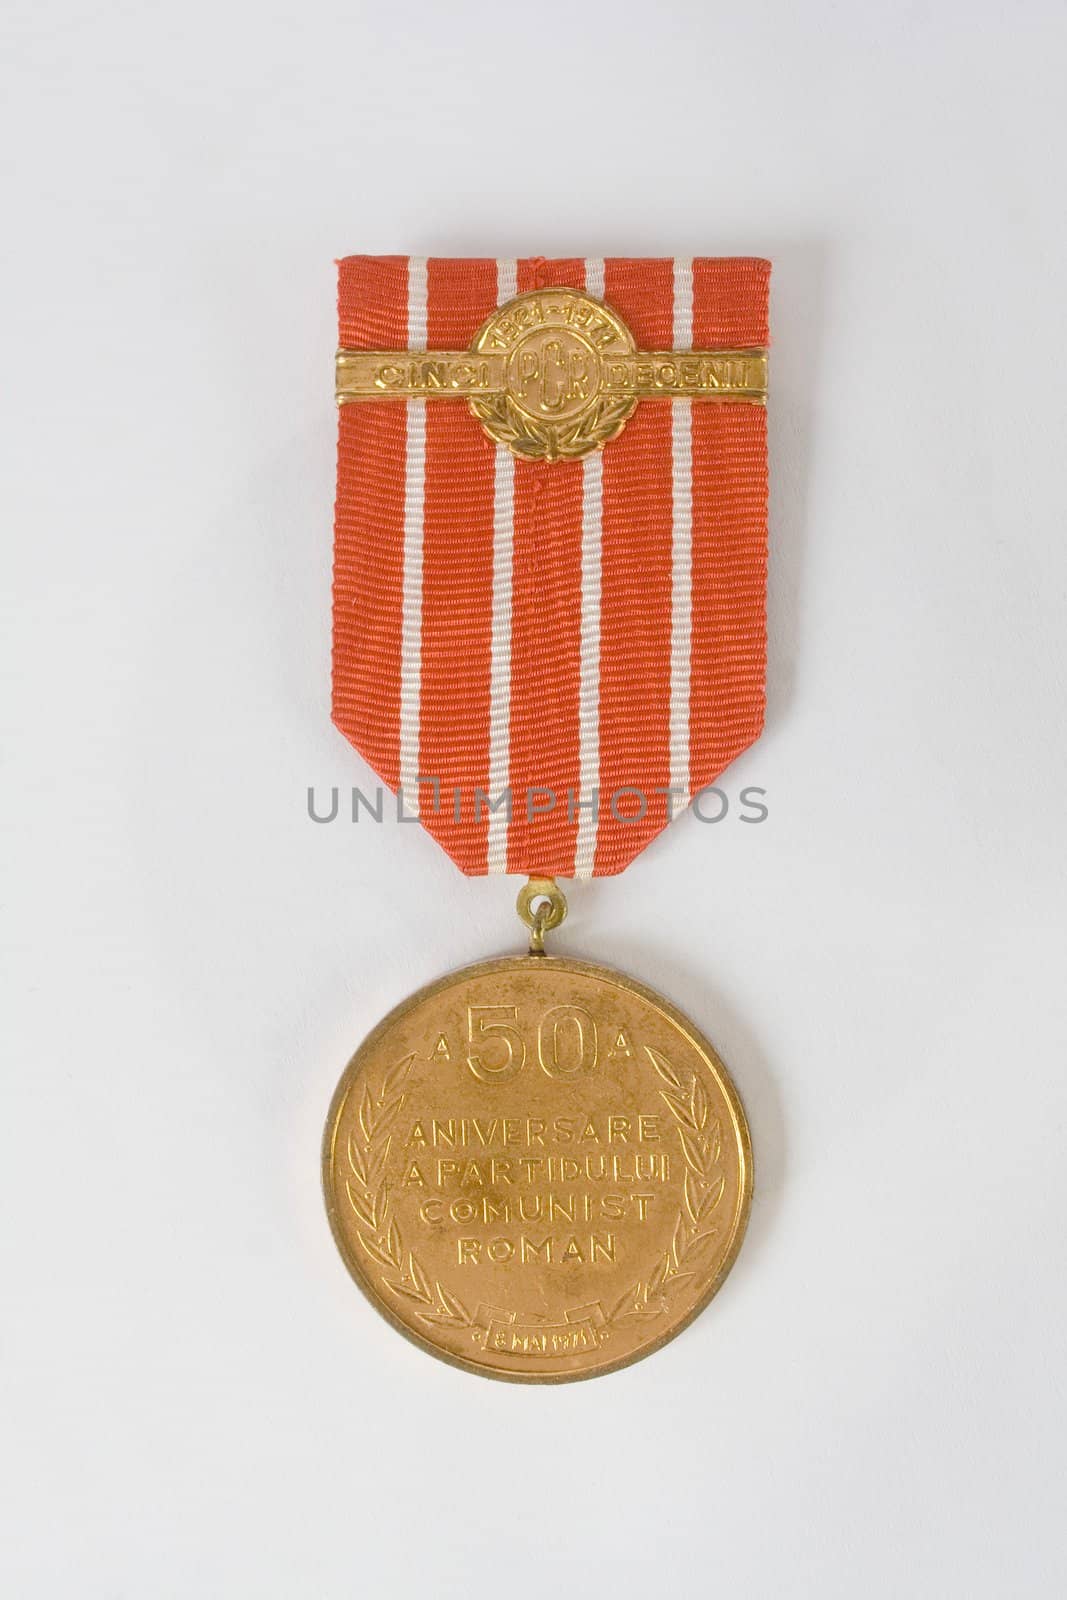 commemorative romanian medal from communism